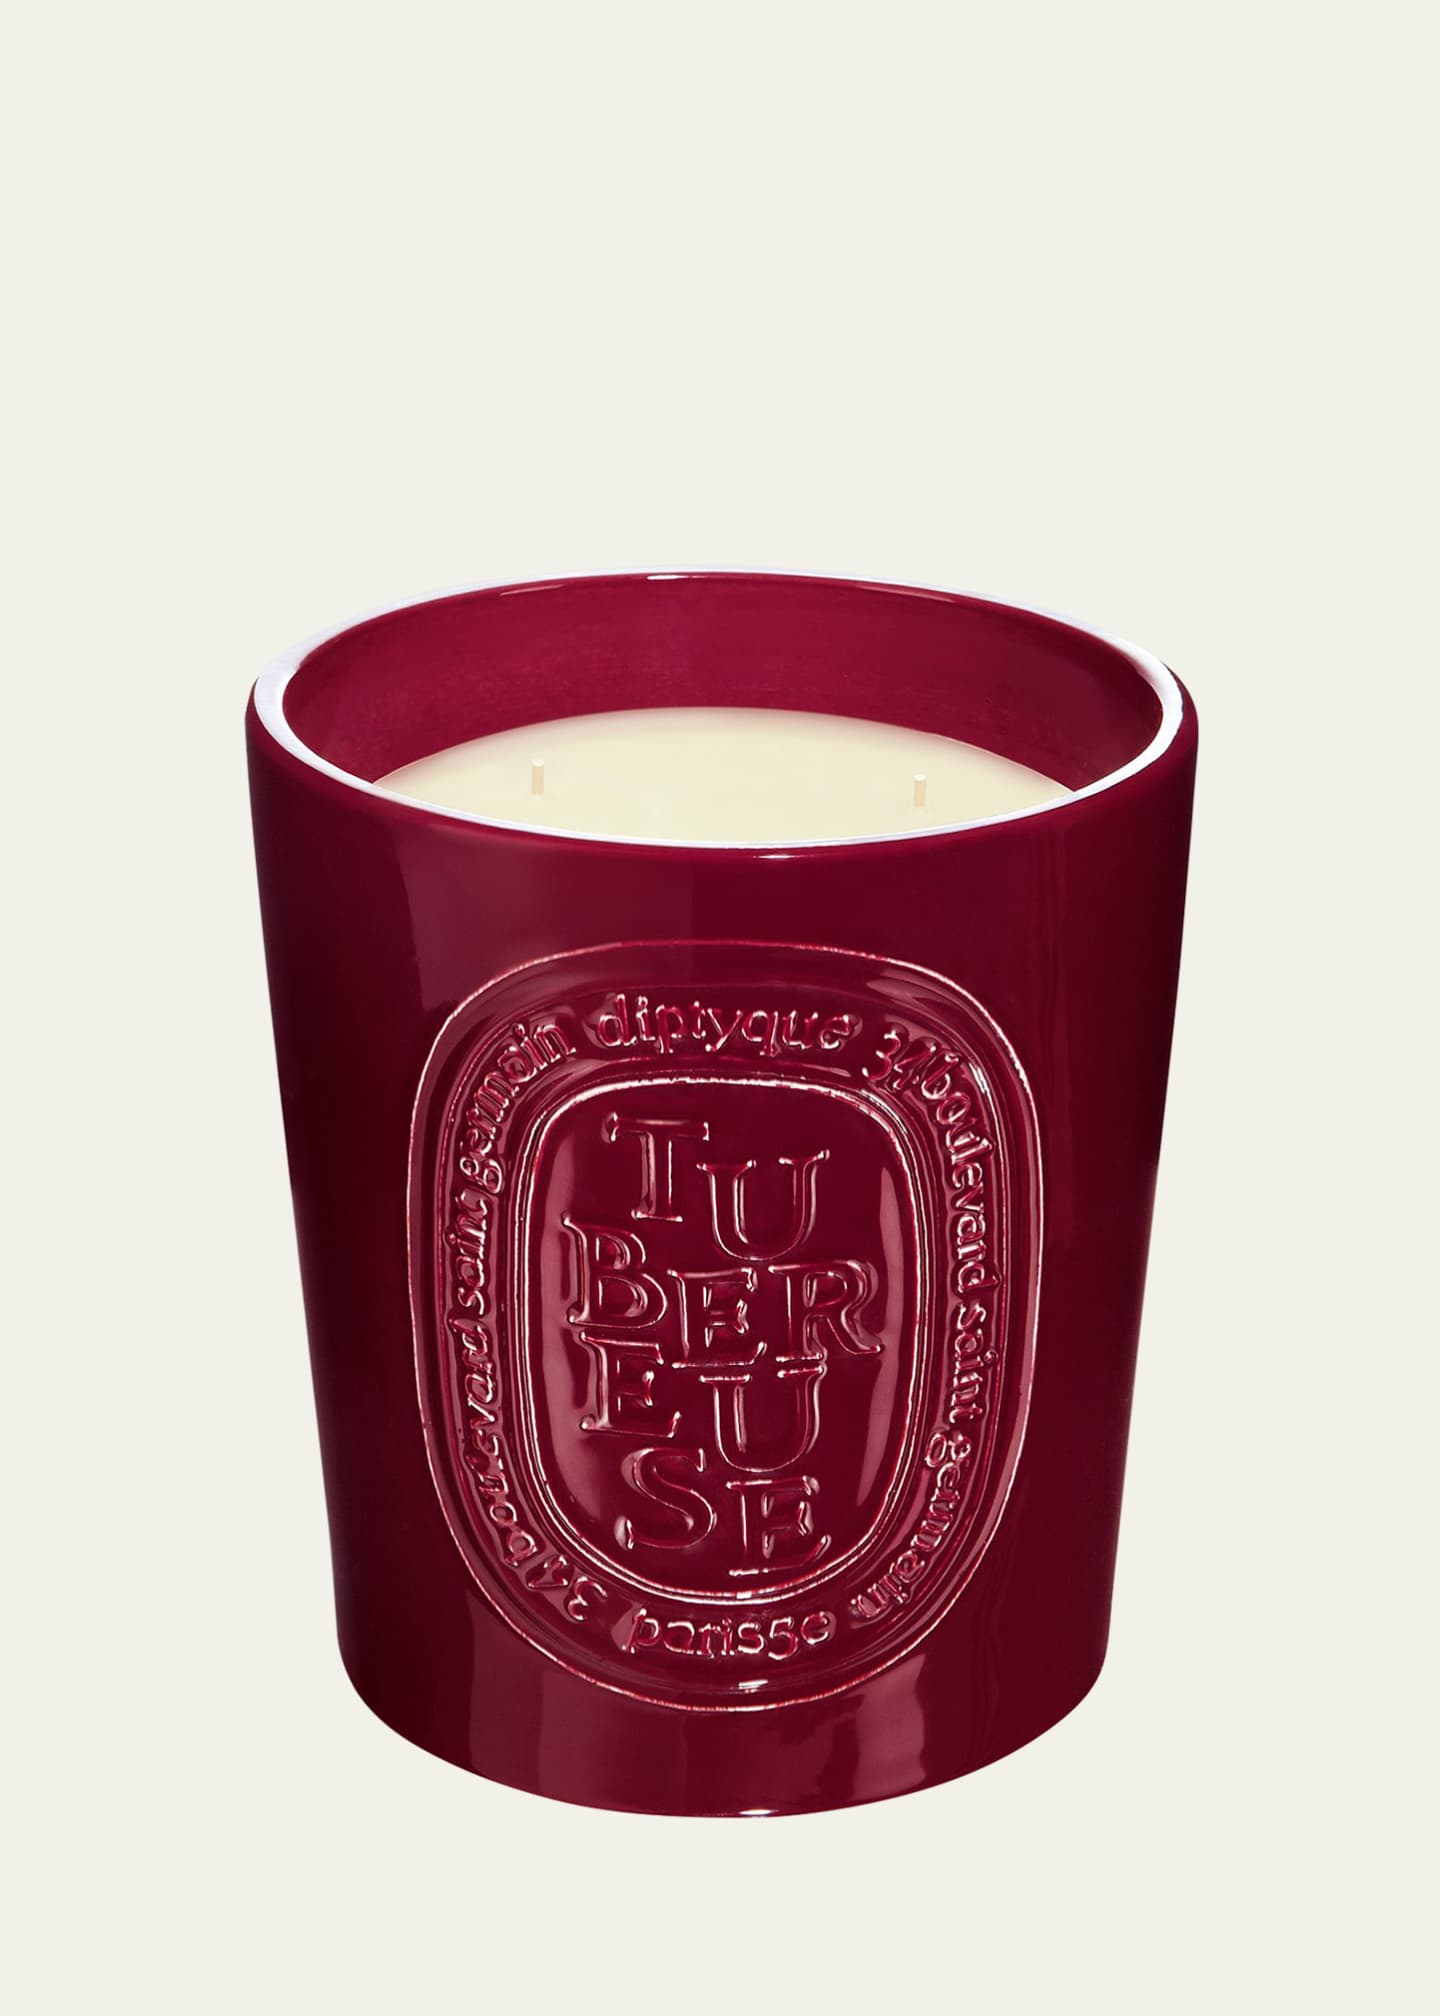 DIPTYQUE Tubereuse (Tuberose) Scented Candle, 51.3 oz. Image 1 of 2